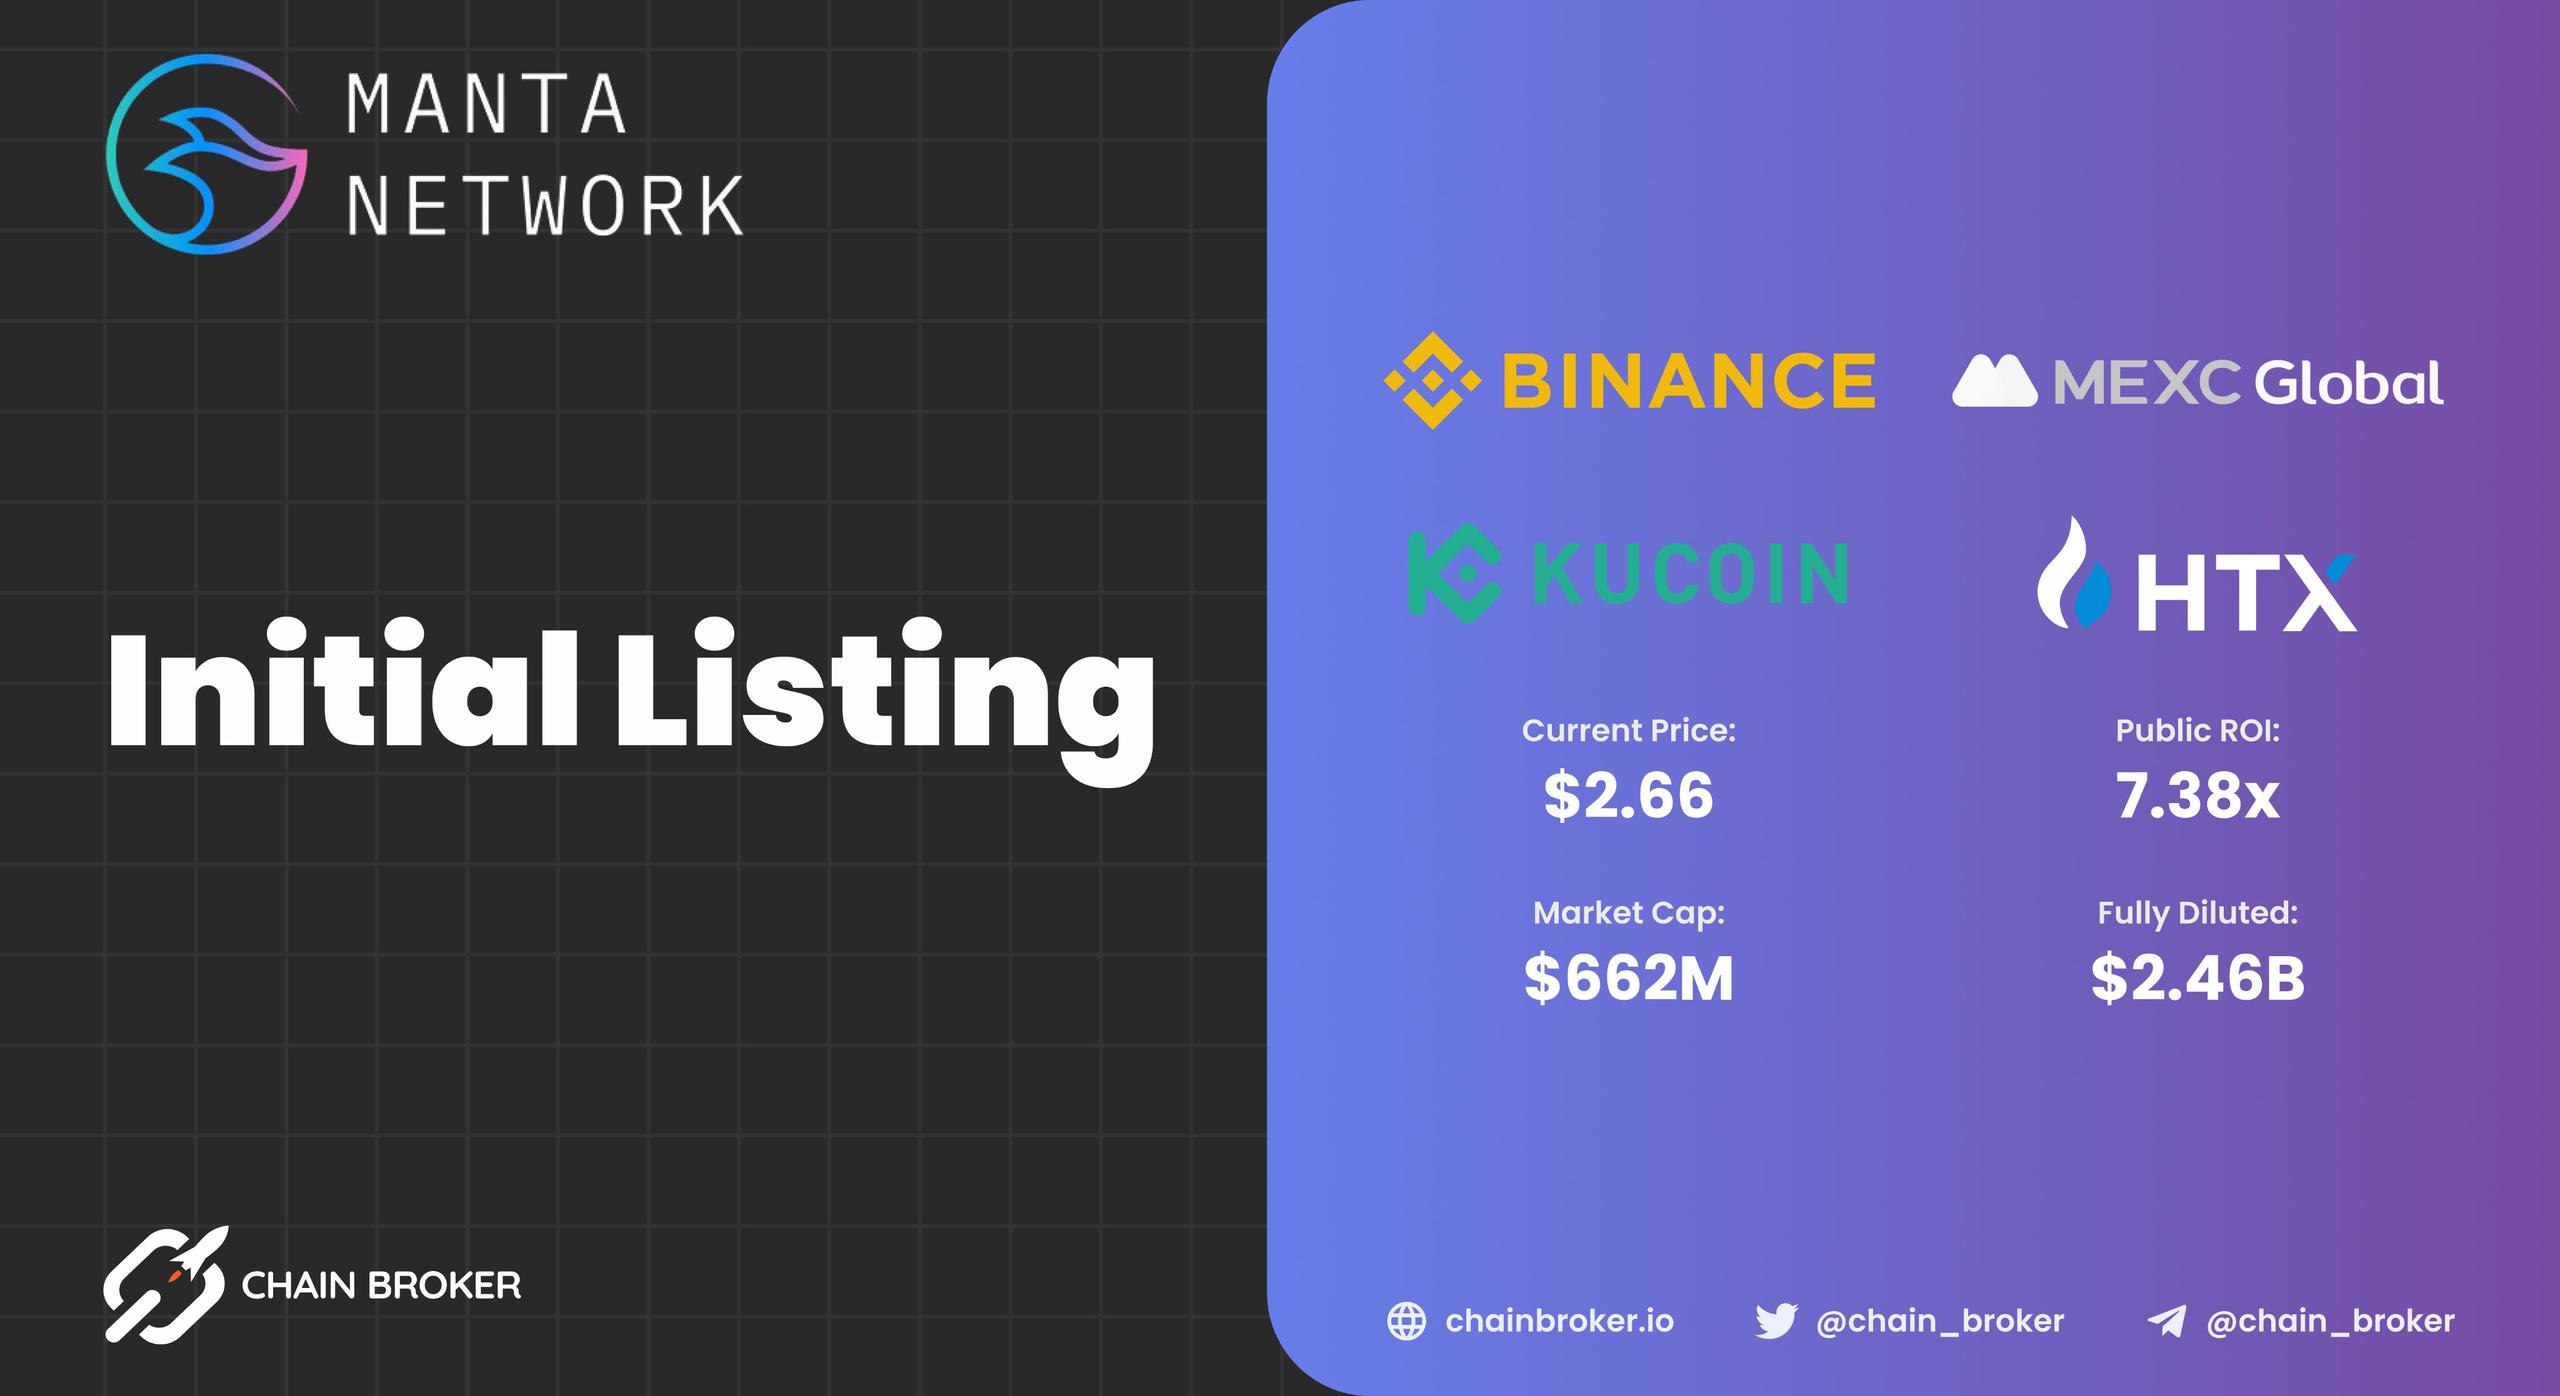 Manta Network has been Listed on Multiple Exchanges